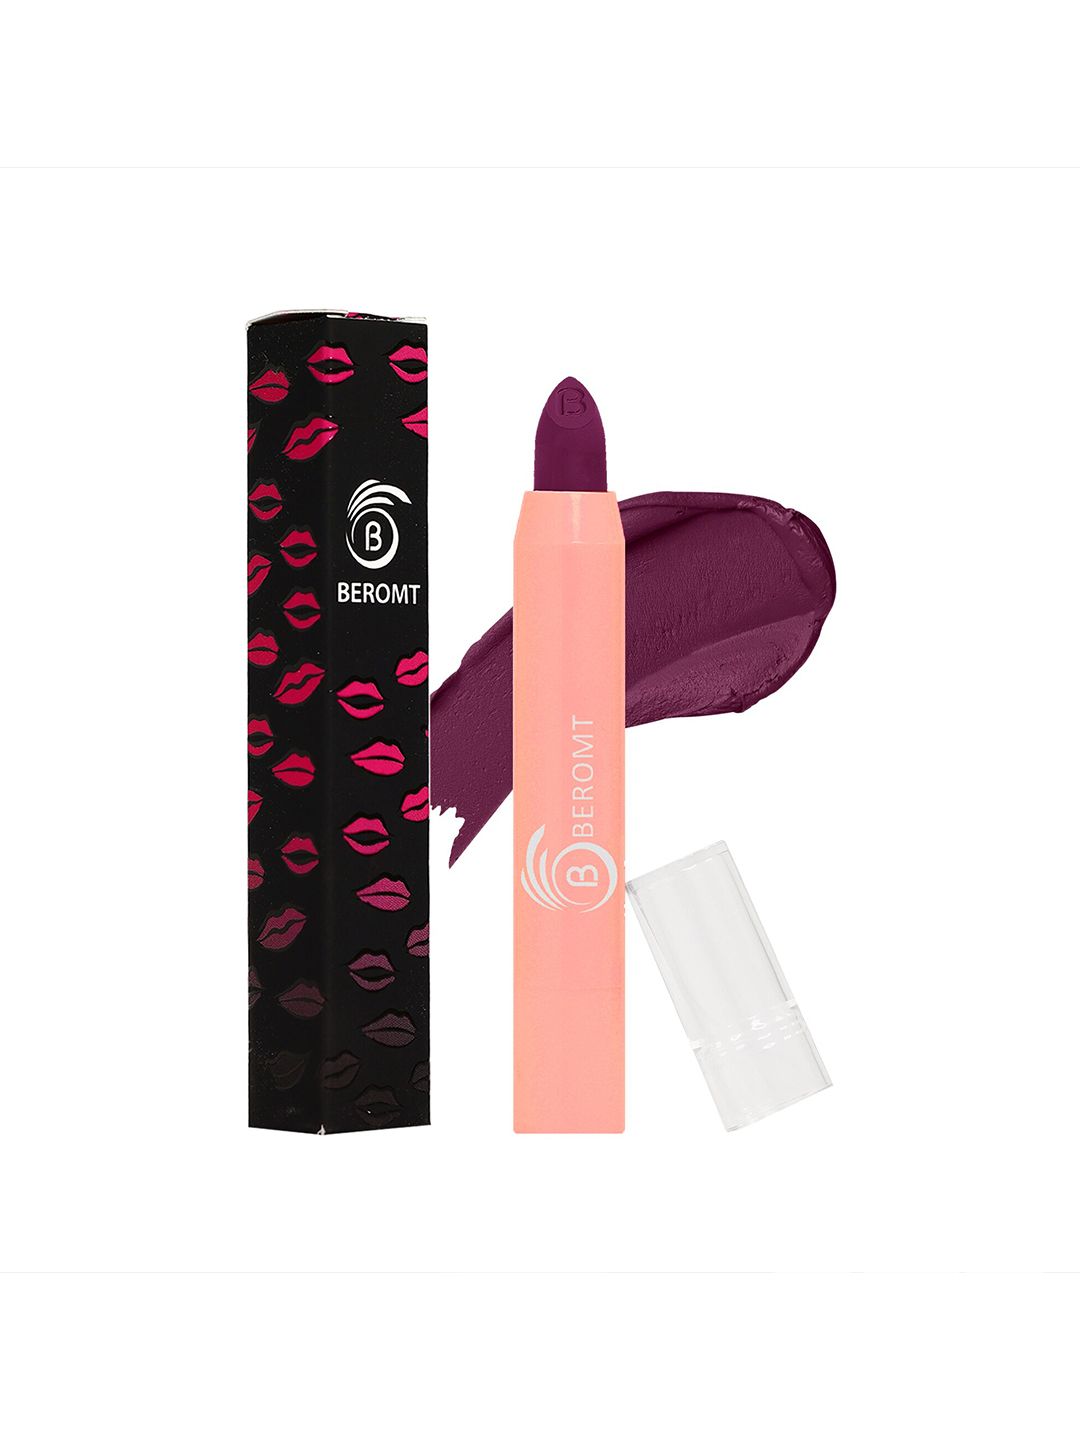 BEROMT Smudge Proof Perfect Pout Long-Lasting Matte Lip Crayon - Retro Girl BLC12 Price in India